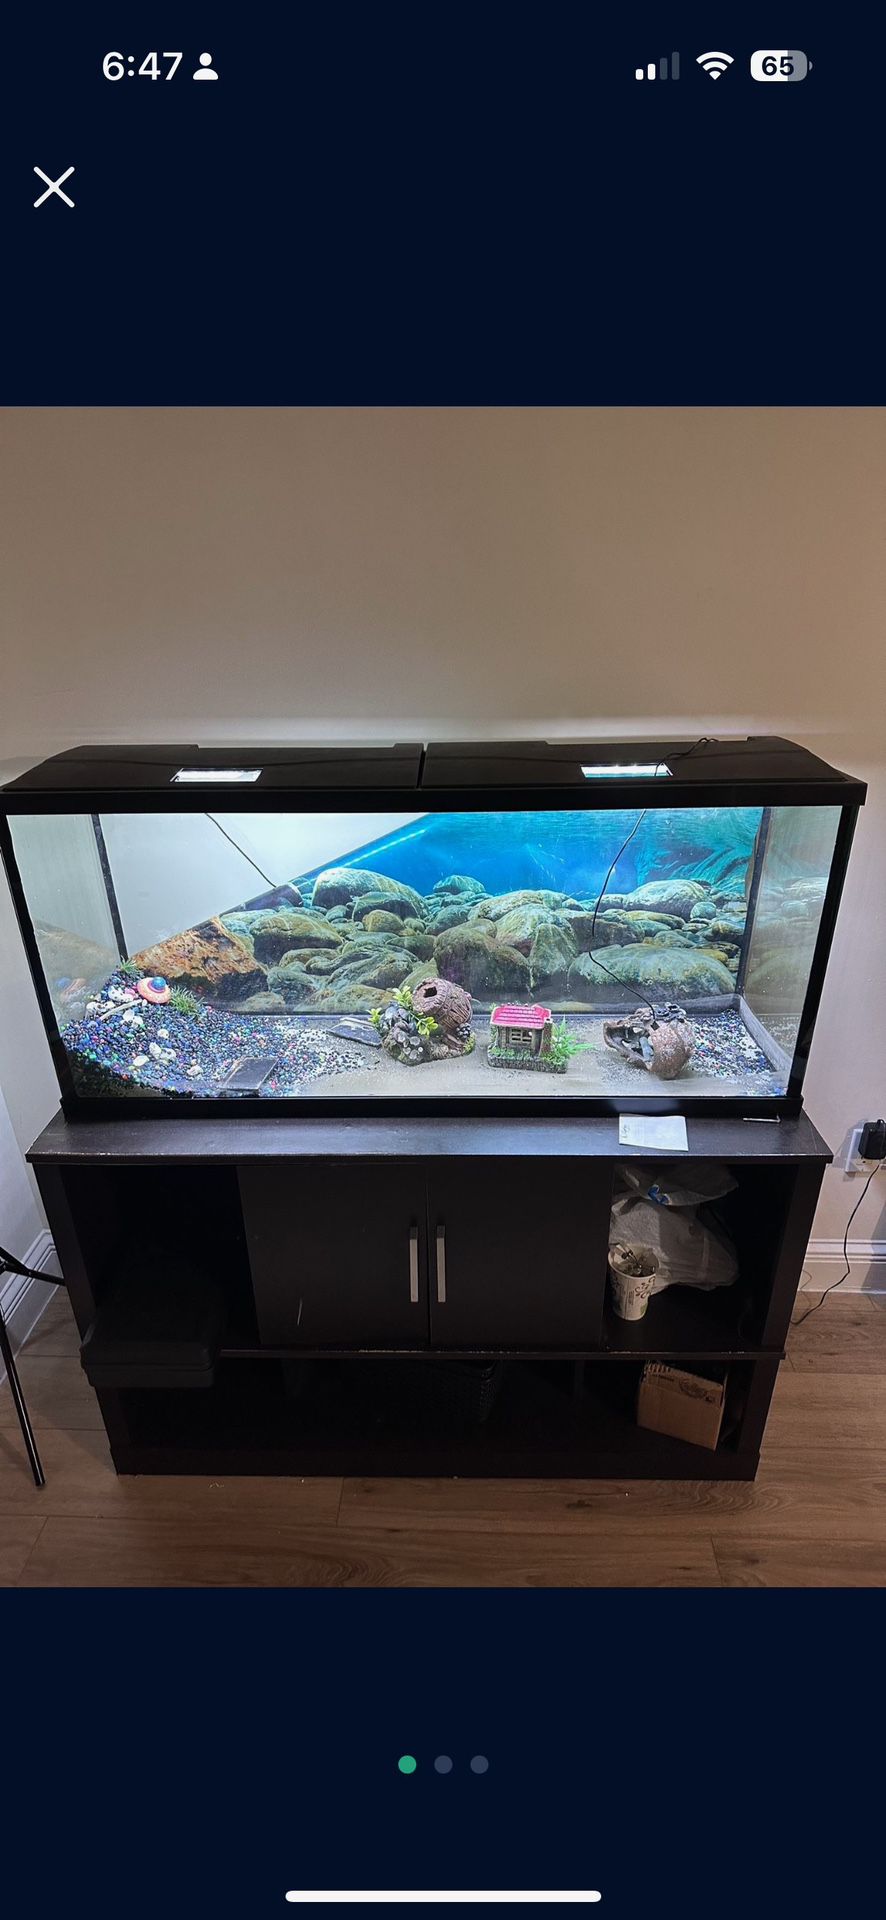 55 GALLON FISH TANK AQUARIUM WITH STAND FOR SALE